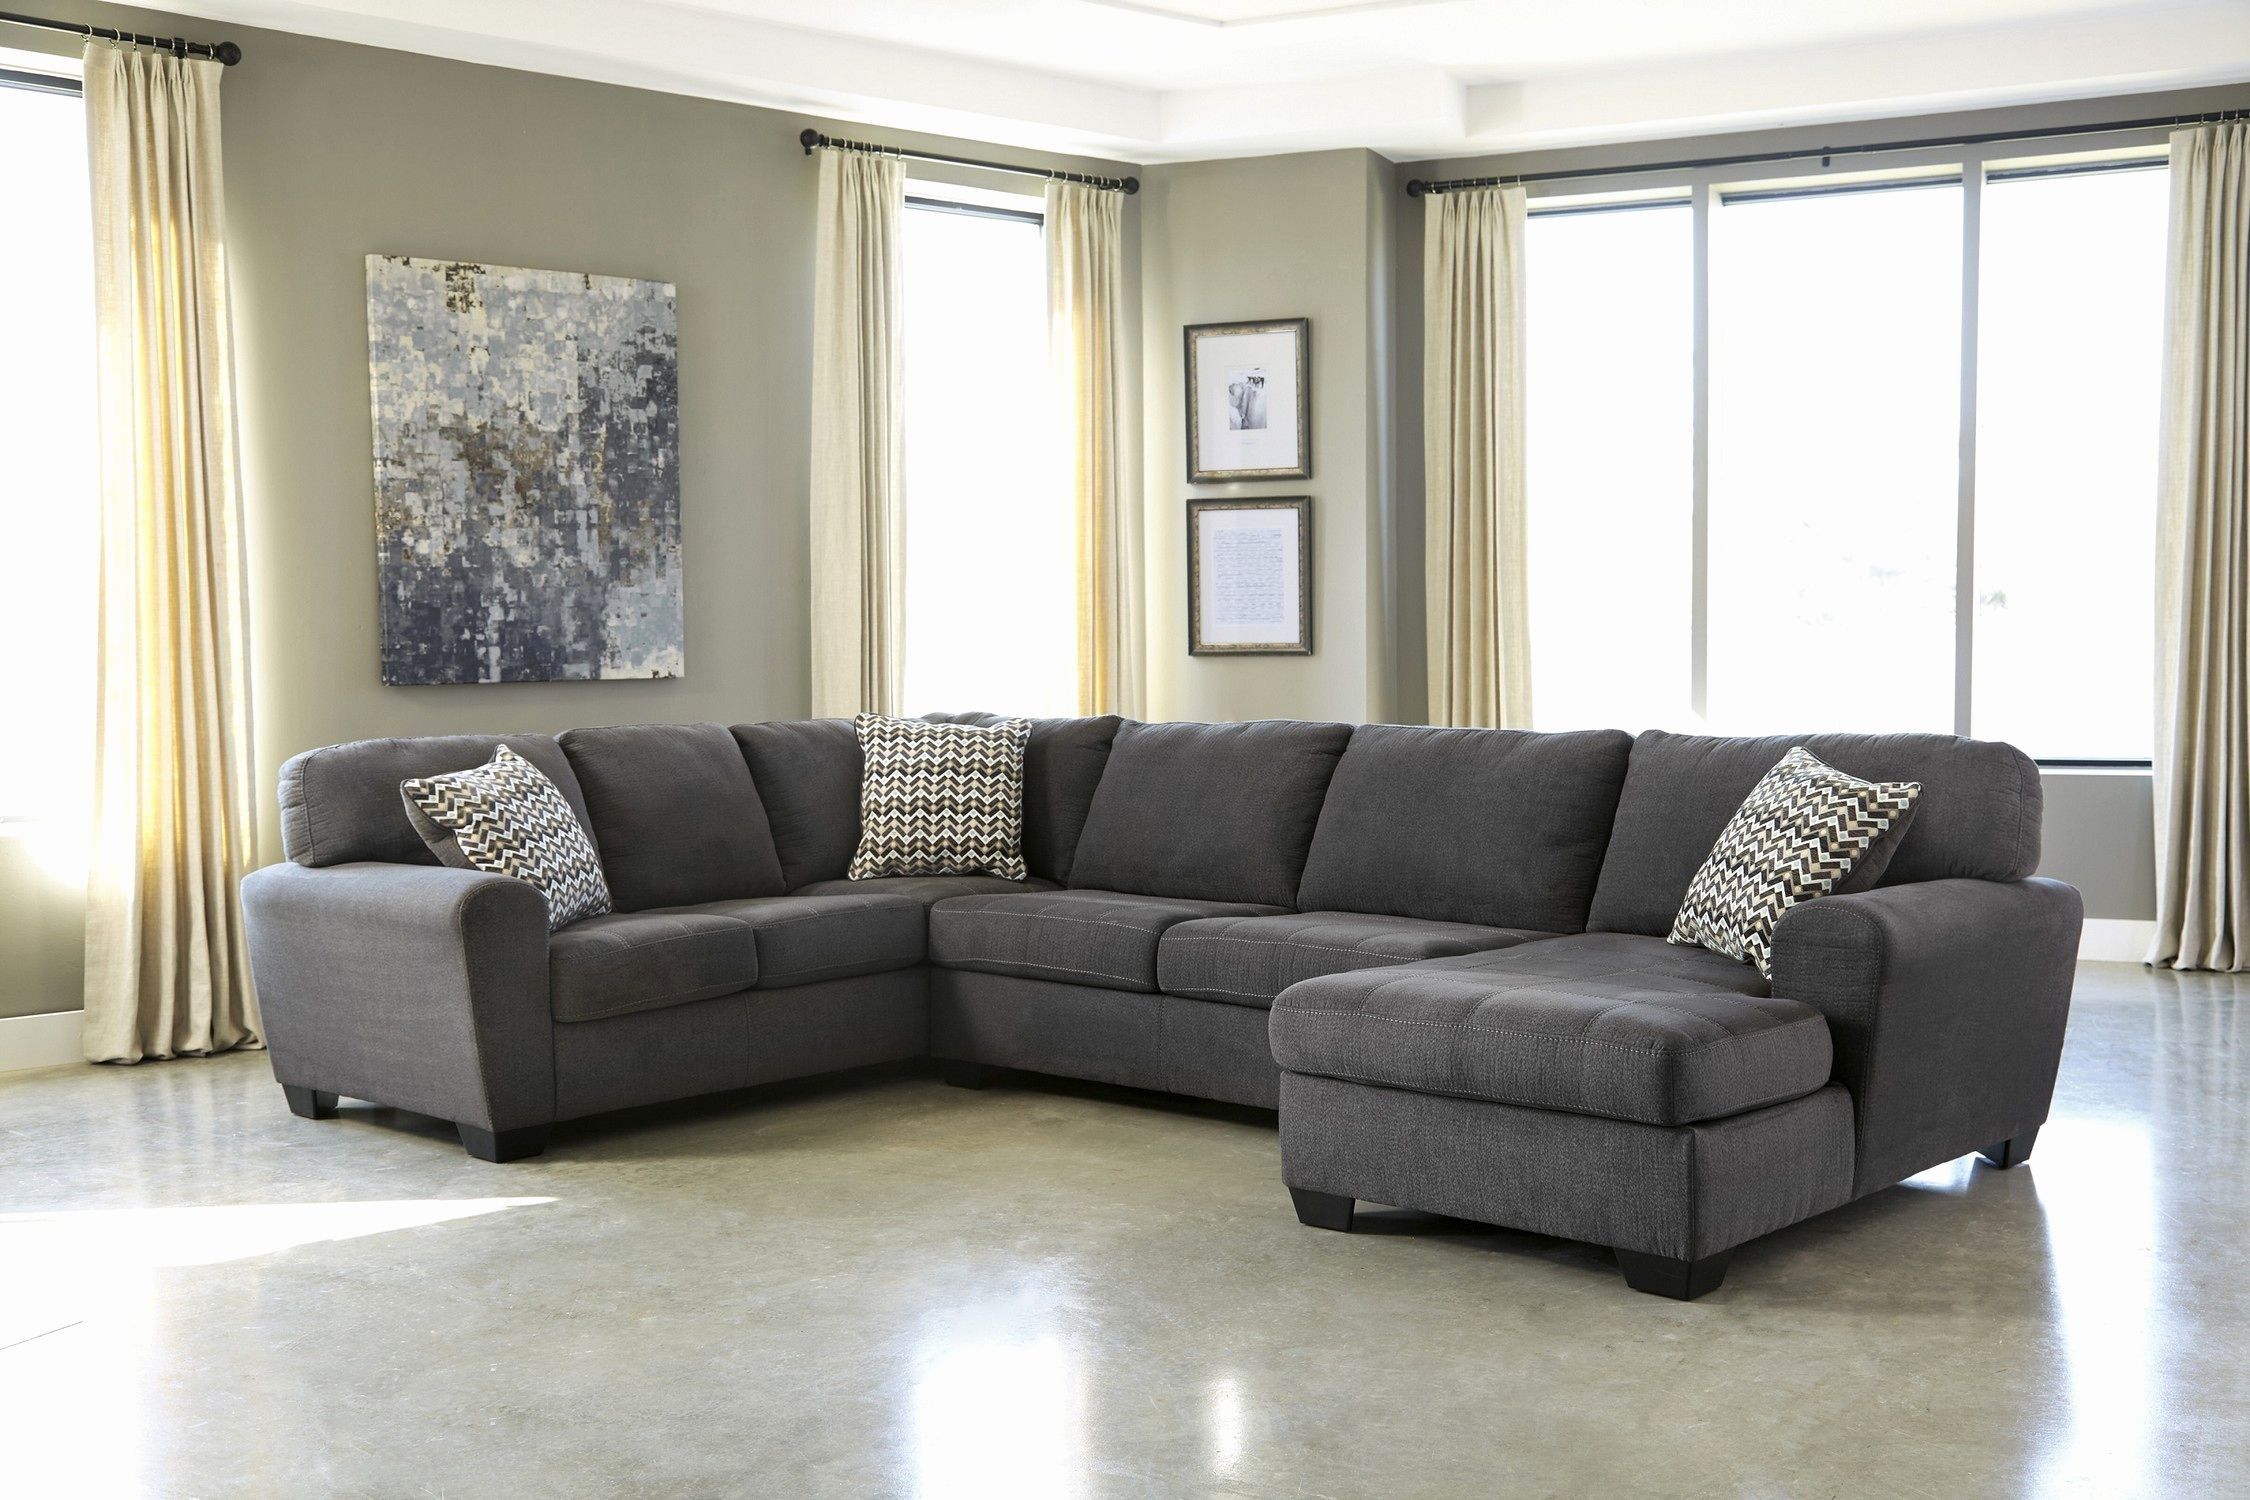 Elegant Charcoal Gray Sectional Sofa Picture – Modern Sofa In Sectional Sofas In Gray (View 6 of 15)